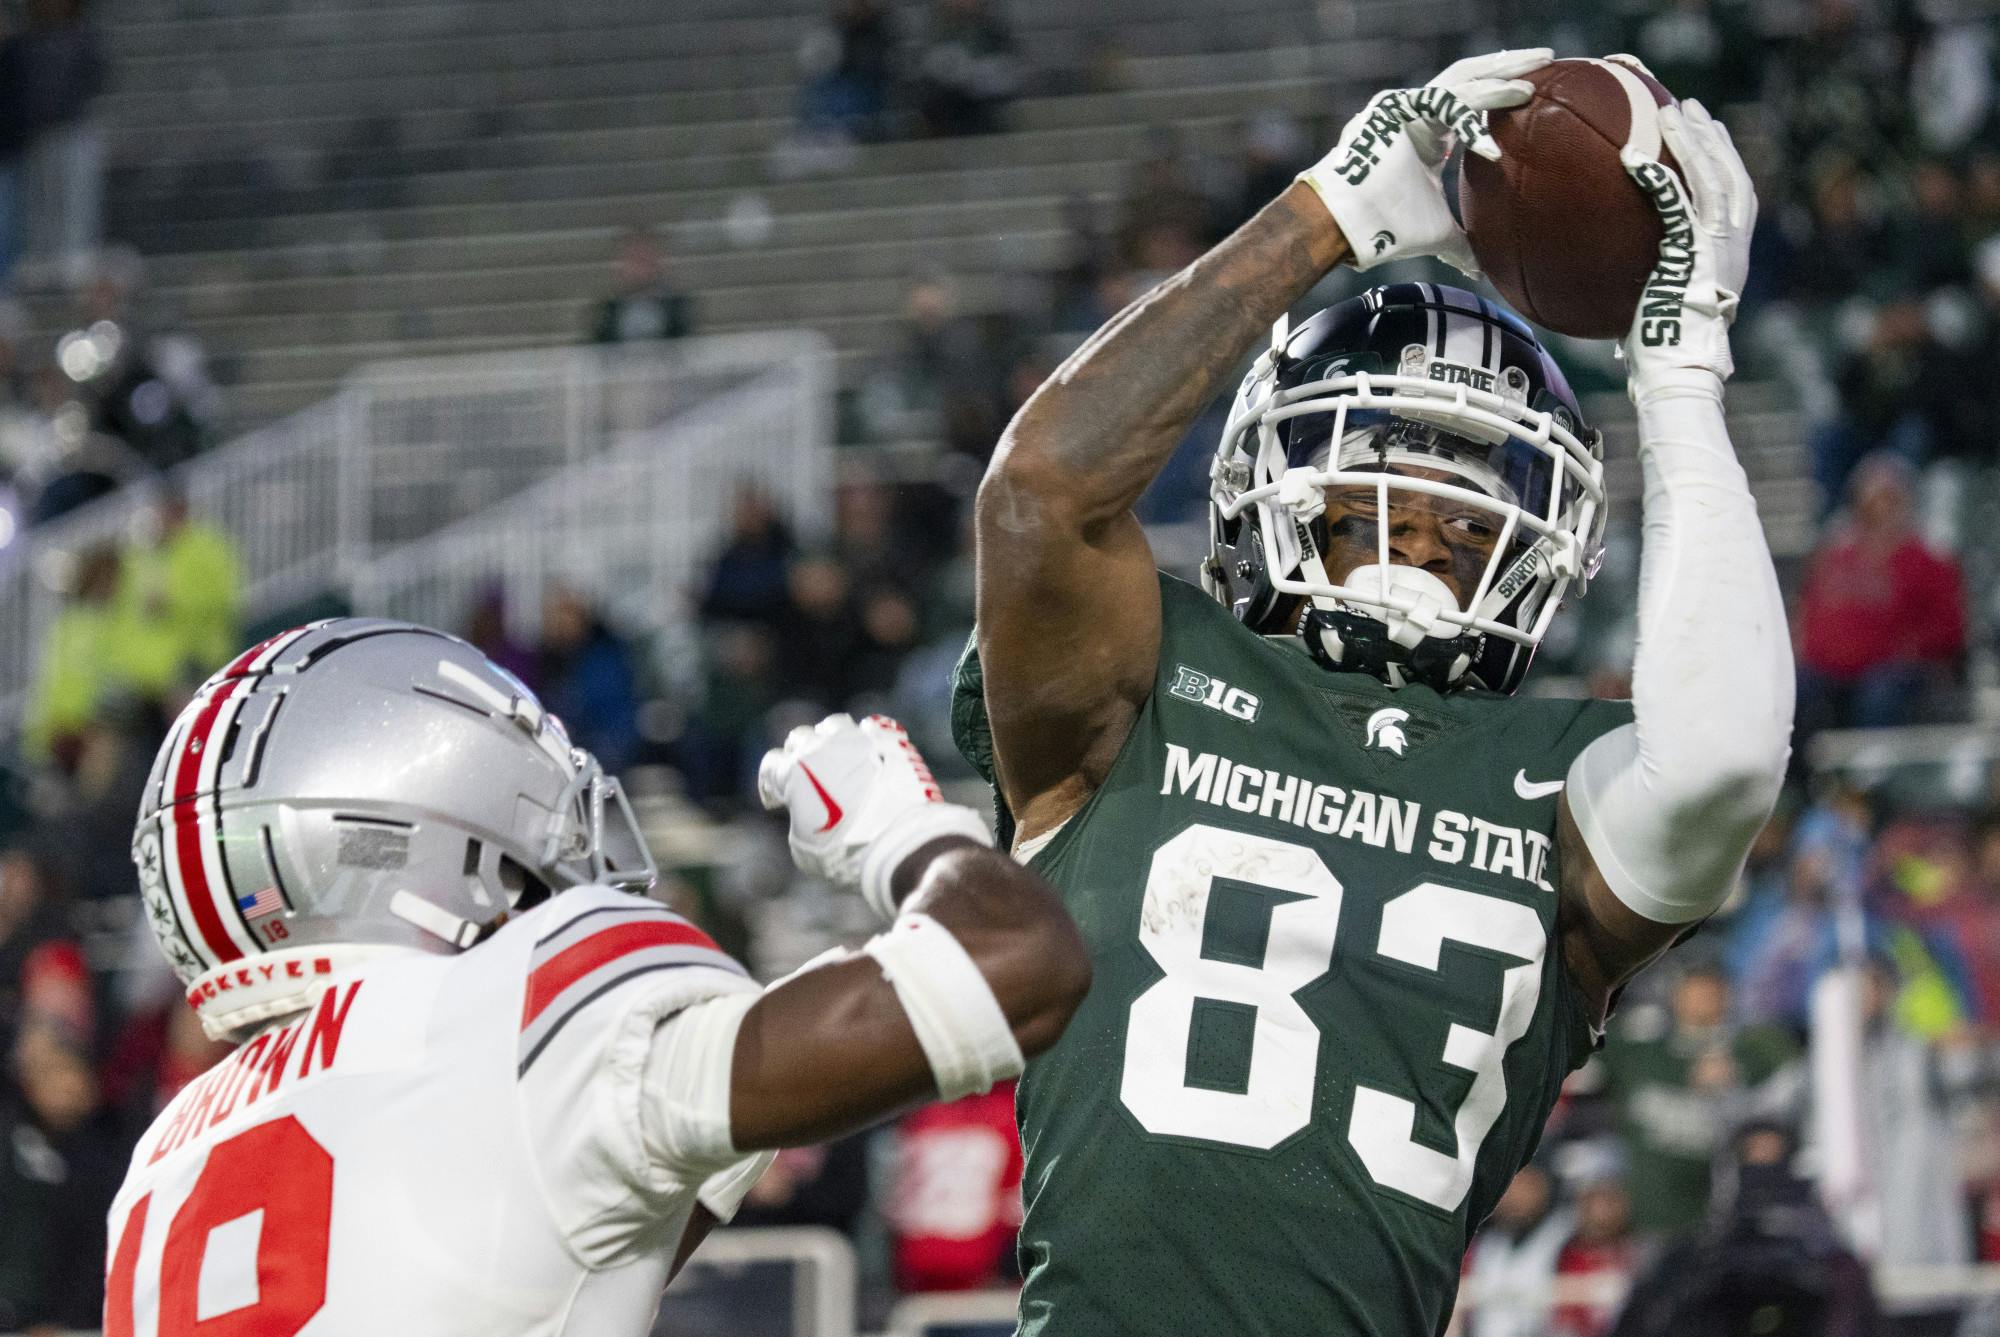 <p>Junior wide receiver Montorie Foster Jr., 83, catches the ball for a Spartan touchdown during Michigan State’s game against Ohio State on Saturday, Oct. 8, 2022 at Spartan Stadium. The Buckeyes ultimately beat the Spartans, 49-20.</p>